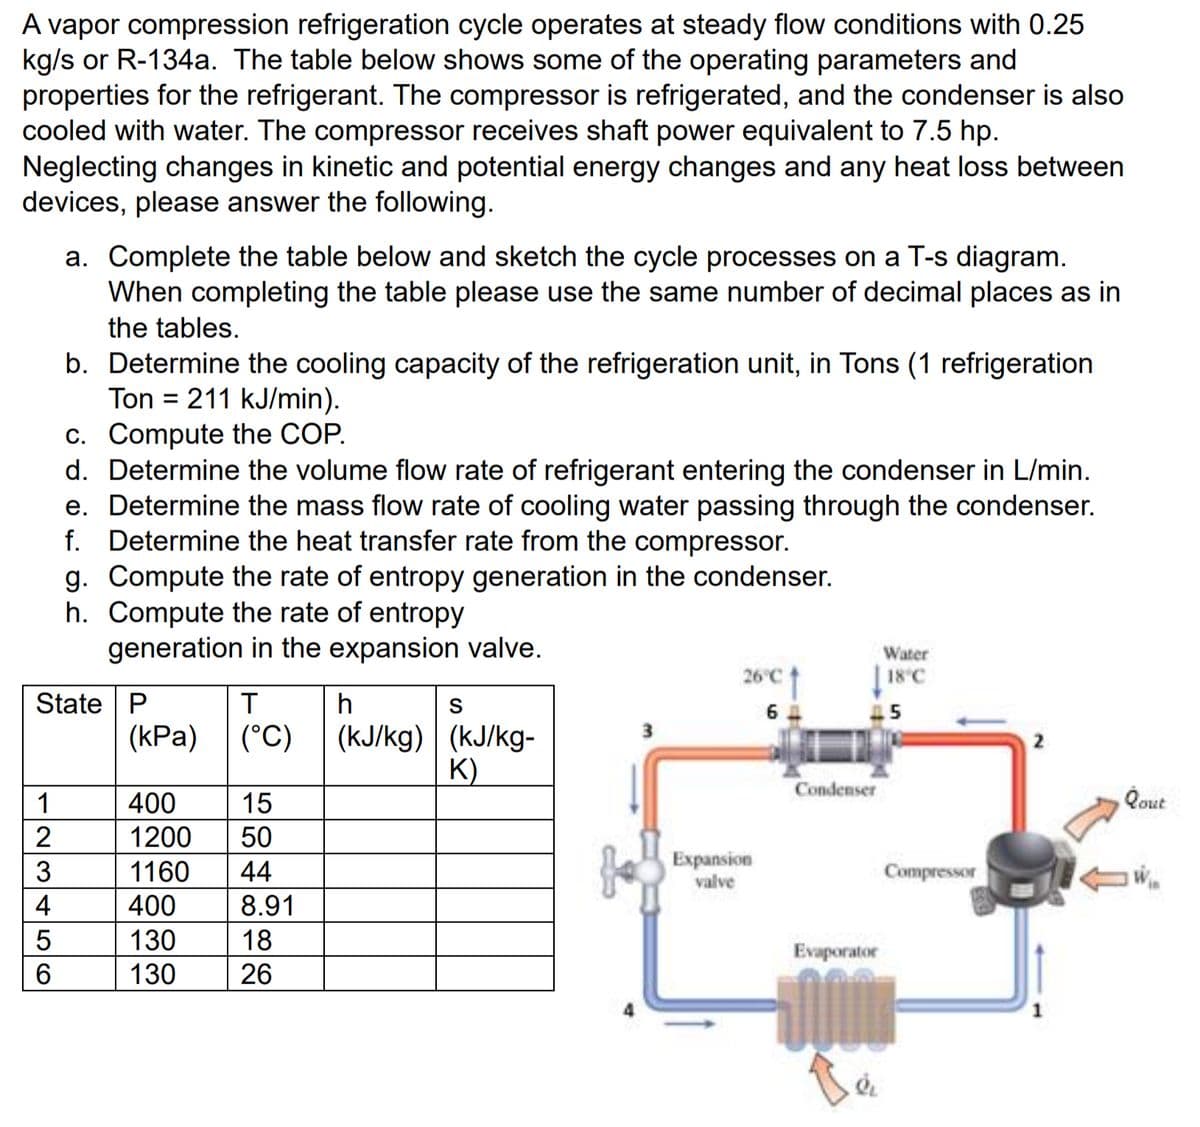 A vapor compression refrigeration cycle operates at steady flow conditions with 0.25
kg/s or R-134a. The table below shows some of the operating parameters and
properties for the refrigerant. The compressor is refrigerated, and the condenser is also
cooled with water. The compressor receives shaft power equivalent to 7.5 hp.
Neglecting changes in kinetic and potential energy changes and any heat loss between
devices, please answer the following.
123456
2
a. Complete the table below and sketch the cycle processes on a T-s diagram.
When completing the table please use the same number of decimal places as in
the tables.
5
b. Determine the cooling capacity of the refrigeration unit, in Tons (1 refrigeration
Ton = 211 kJ/min).
c. Compute the COP.
d. Determine the volume flow rate of refrigerant entering the condenser in L/min.
e. Determine the mass flow rate of cooling water passing through the condenser.
f. Determine the heat transfer rate from the compressor.
State P
g. Compute the rate of entropy generation in the condenser.
h. Compute the rate of entropy
generation in the expansion valve.
T
(kPa) (°C)
15
400
1200 50
1160
44
400
8.91
130
18
130
26
h
S
(kJ/kg) (kJ/kg-
K)
3
26°C
6
Expansion
valve
Condenser
Water
18°C
15
Compressor
Evaporator
TAMME
Qout